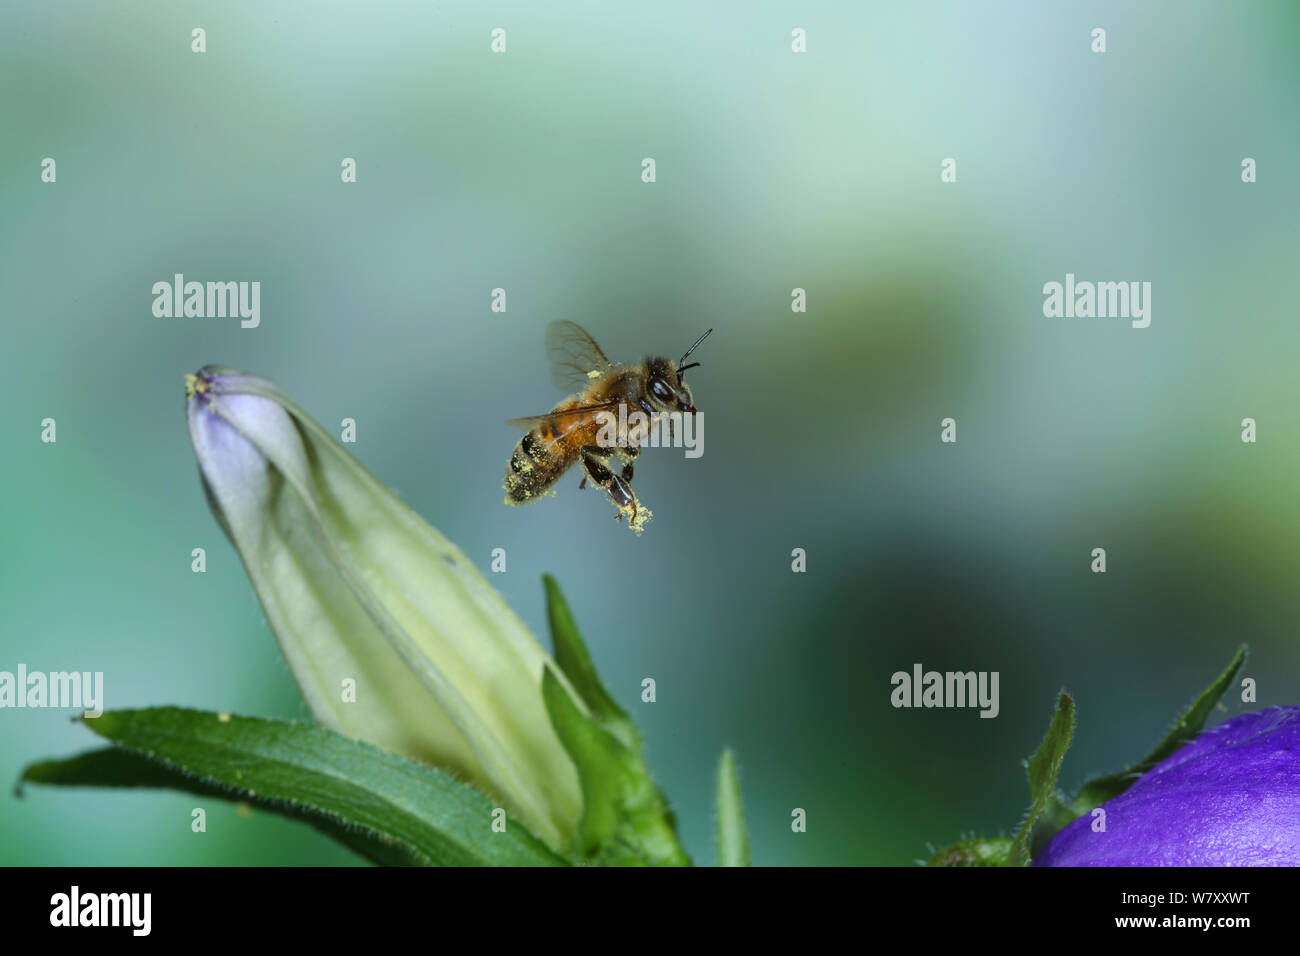 Honey bee (Apis mellifera) pollen-covered worker in flight next to Canterbury bell, Surrey, England, June. Stock Photo